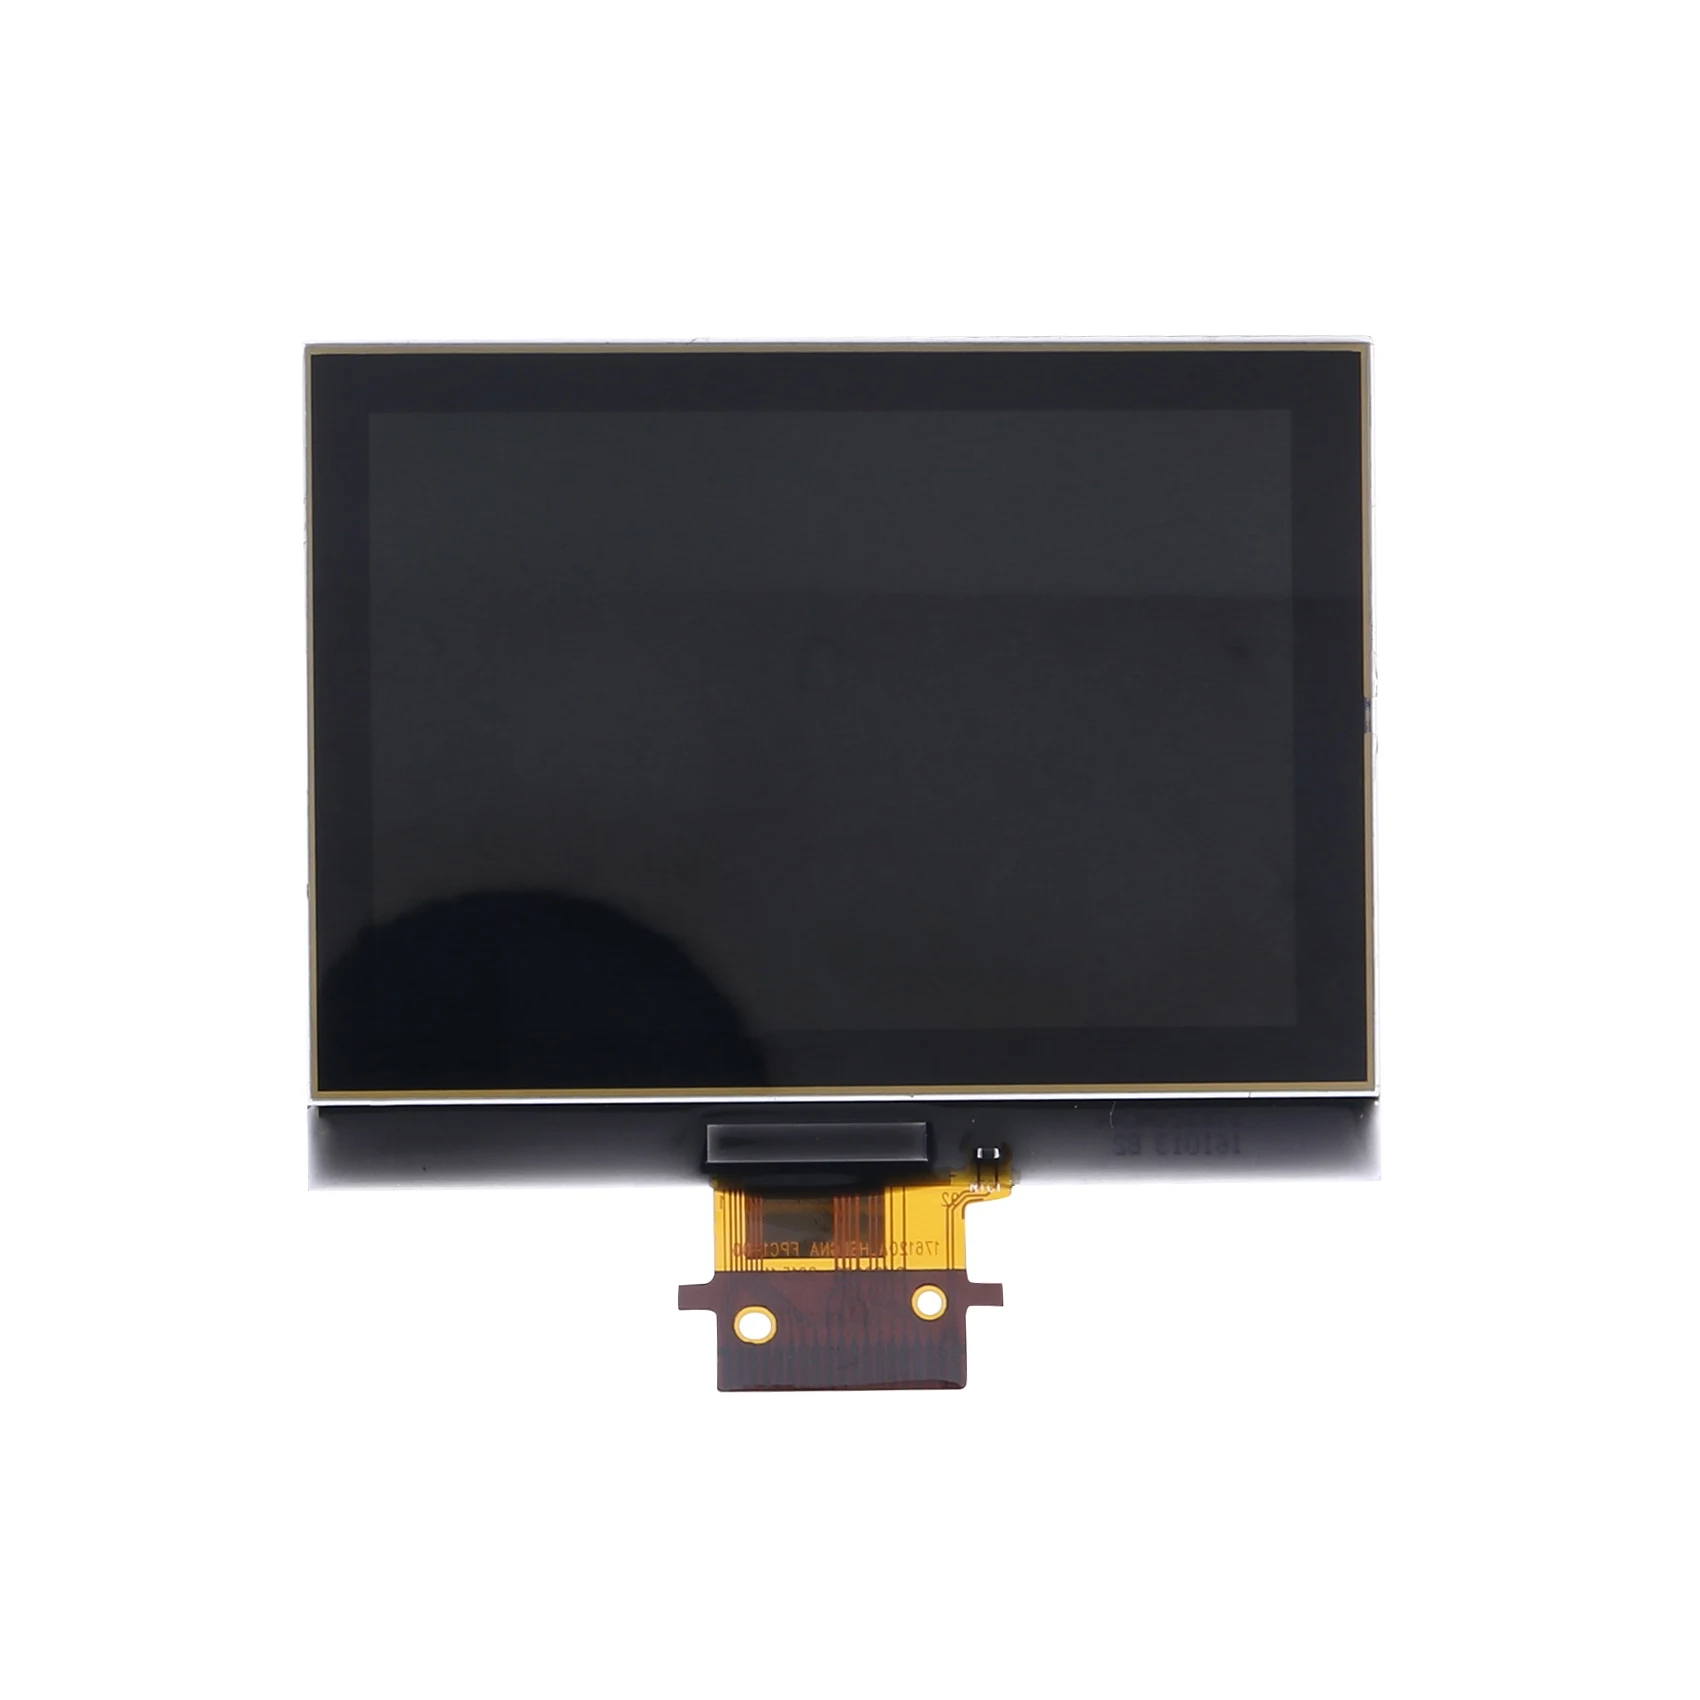 

Car VDO Tacho LCD Display for VW Golf 5 1K Caddy 2K for Touran 1T G for Passat 3C A2C00043350